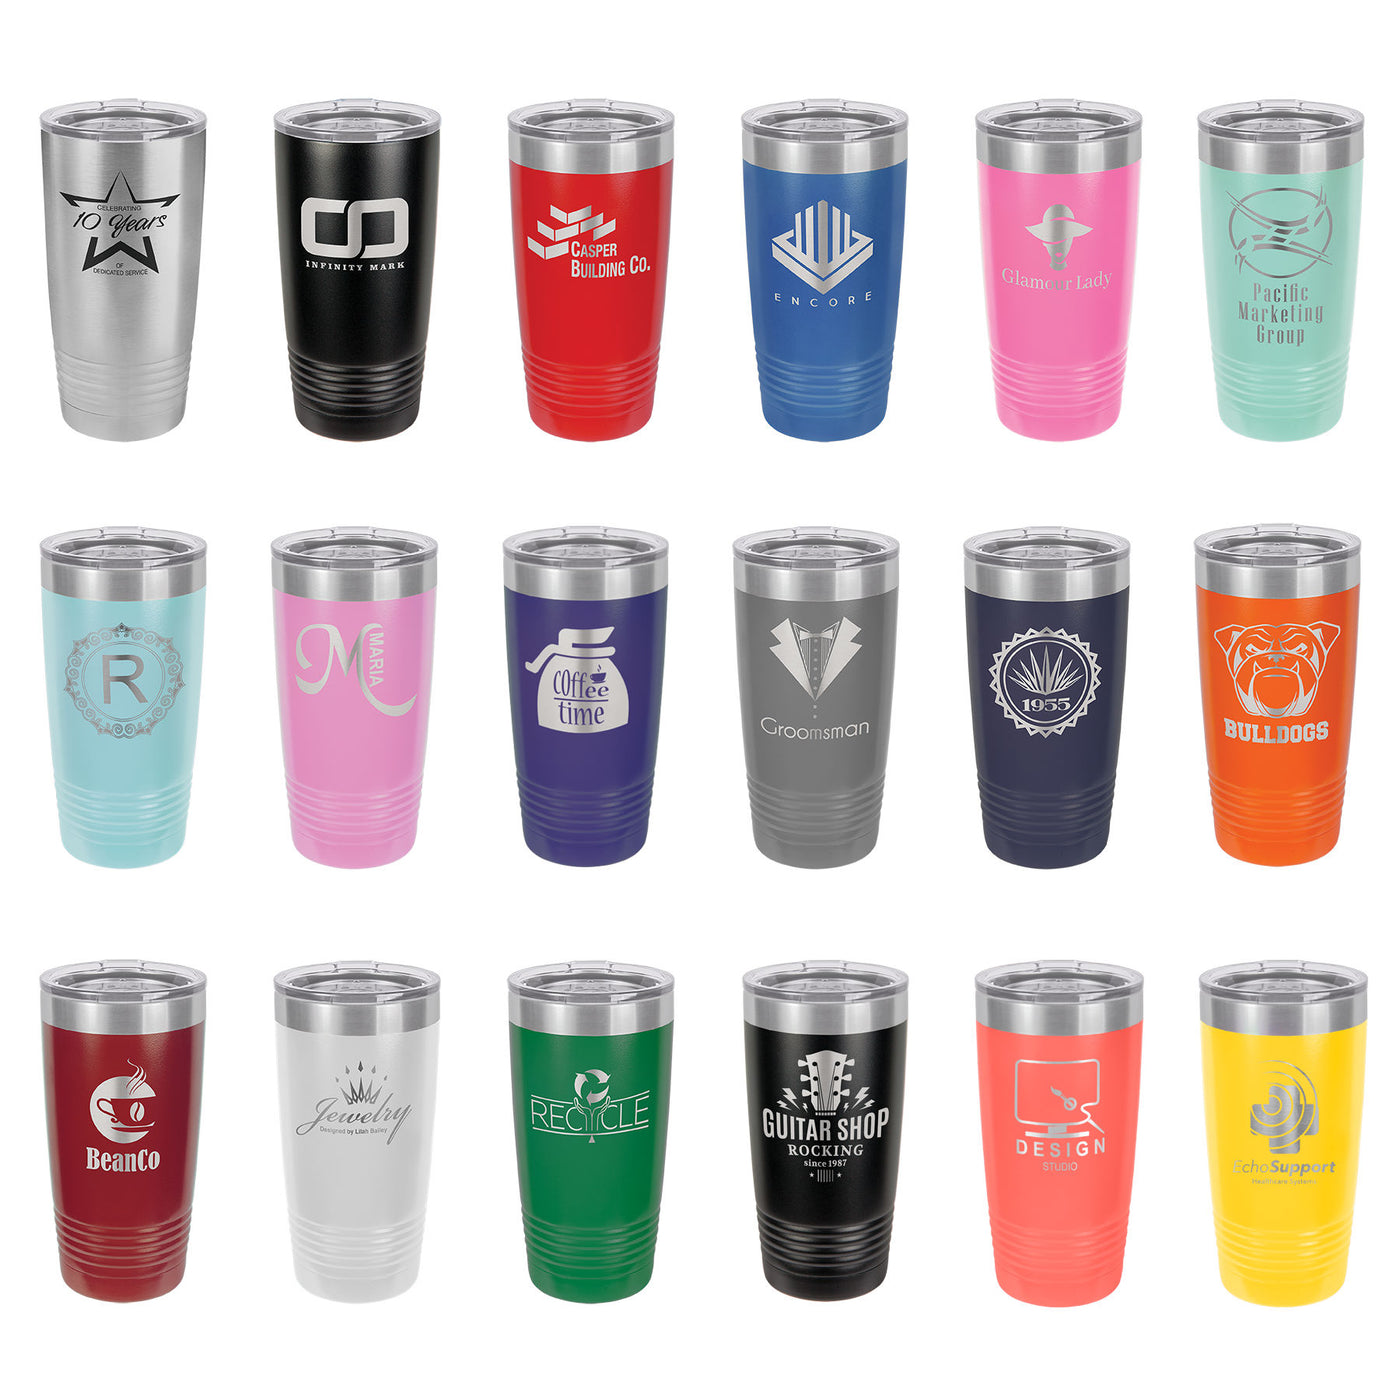 Warning! Girls Are Drinking Again Stainless Steel Insulated 20 Oz Tumbler